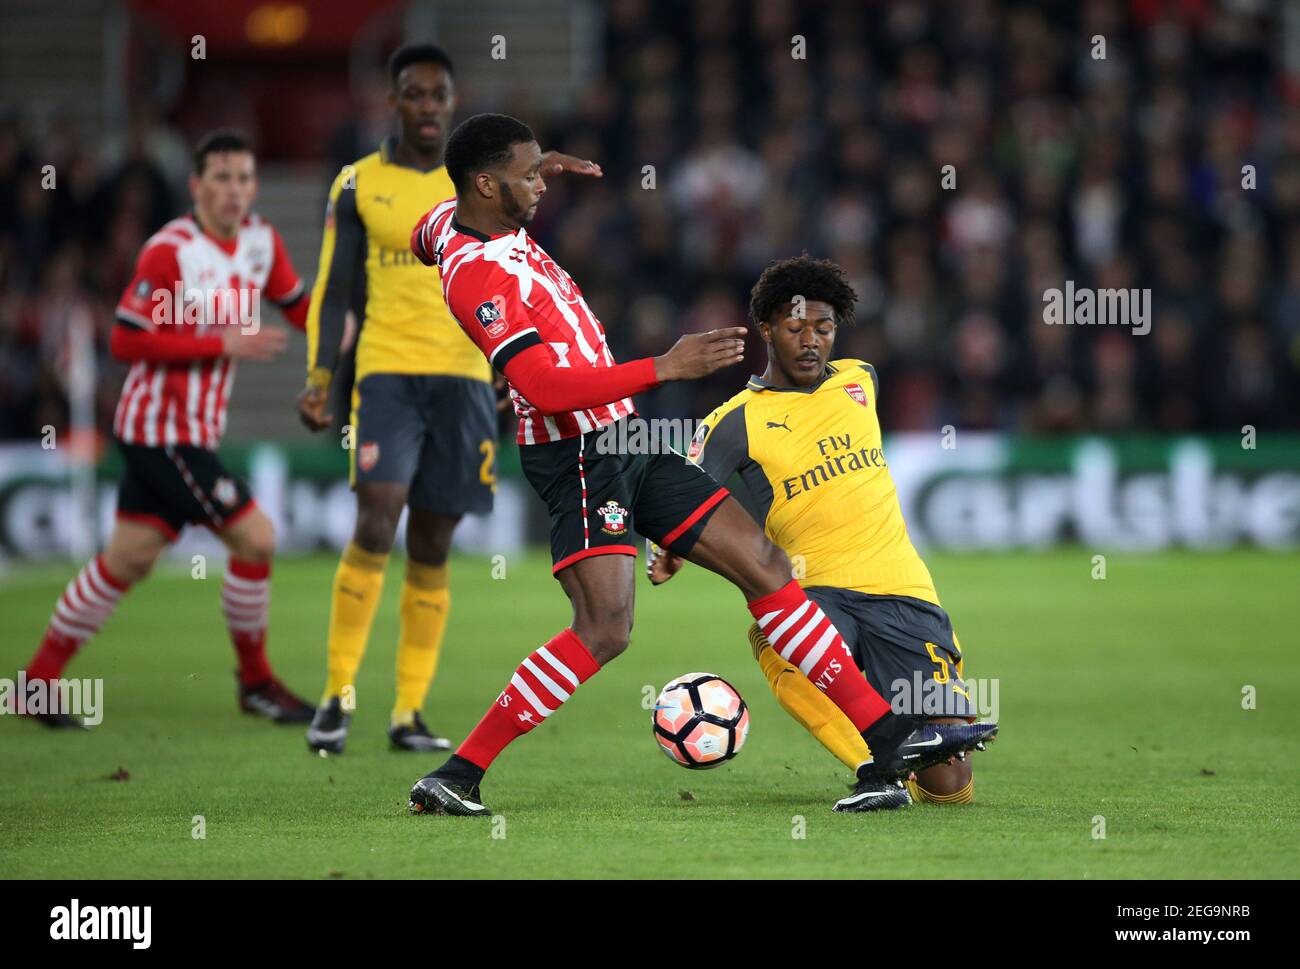 Britain Football Soccer - Southampton v Arsenal - FA Cup Fourth Round - St Mary's Stadium - 28/1/17 Southampton's Cuco Martina in action with Arsenal's Ainsley Maitland-Niles  Reuters / Paul Hackett Livepic EDITORIAL USE ONLY. No use with unauthorized audio, video, data, fixture lists, club/league logos or 'live' services. Online in-match use limited to 45 images, no video emulation. No use in betting, games or single club/league/player publications.  Please contact your account representative for further details. Stock Photo